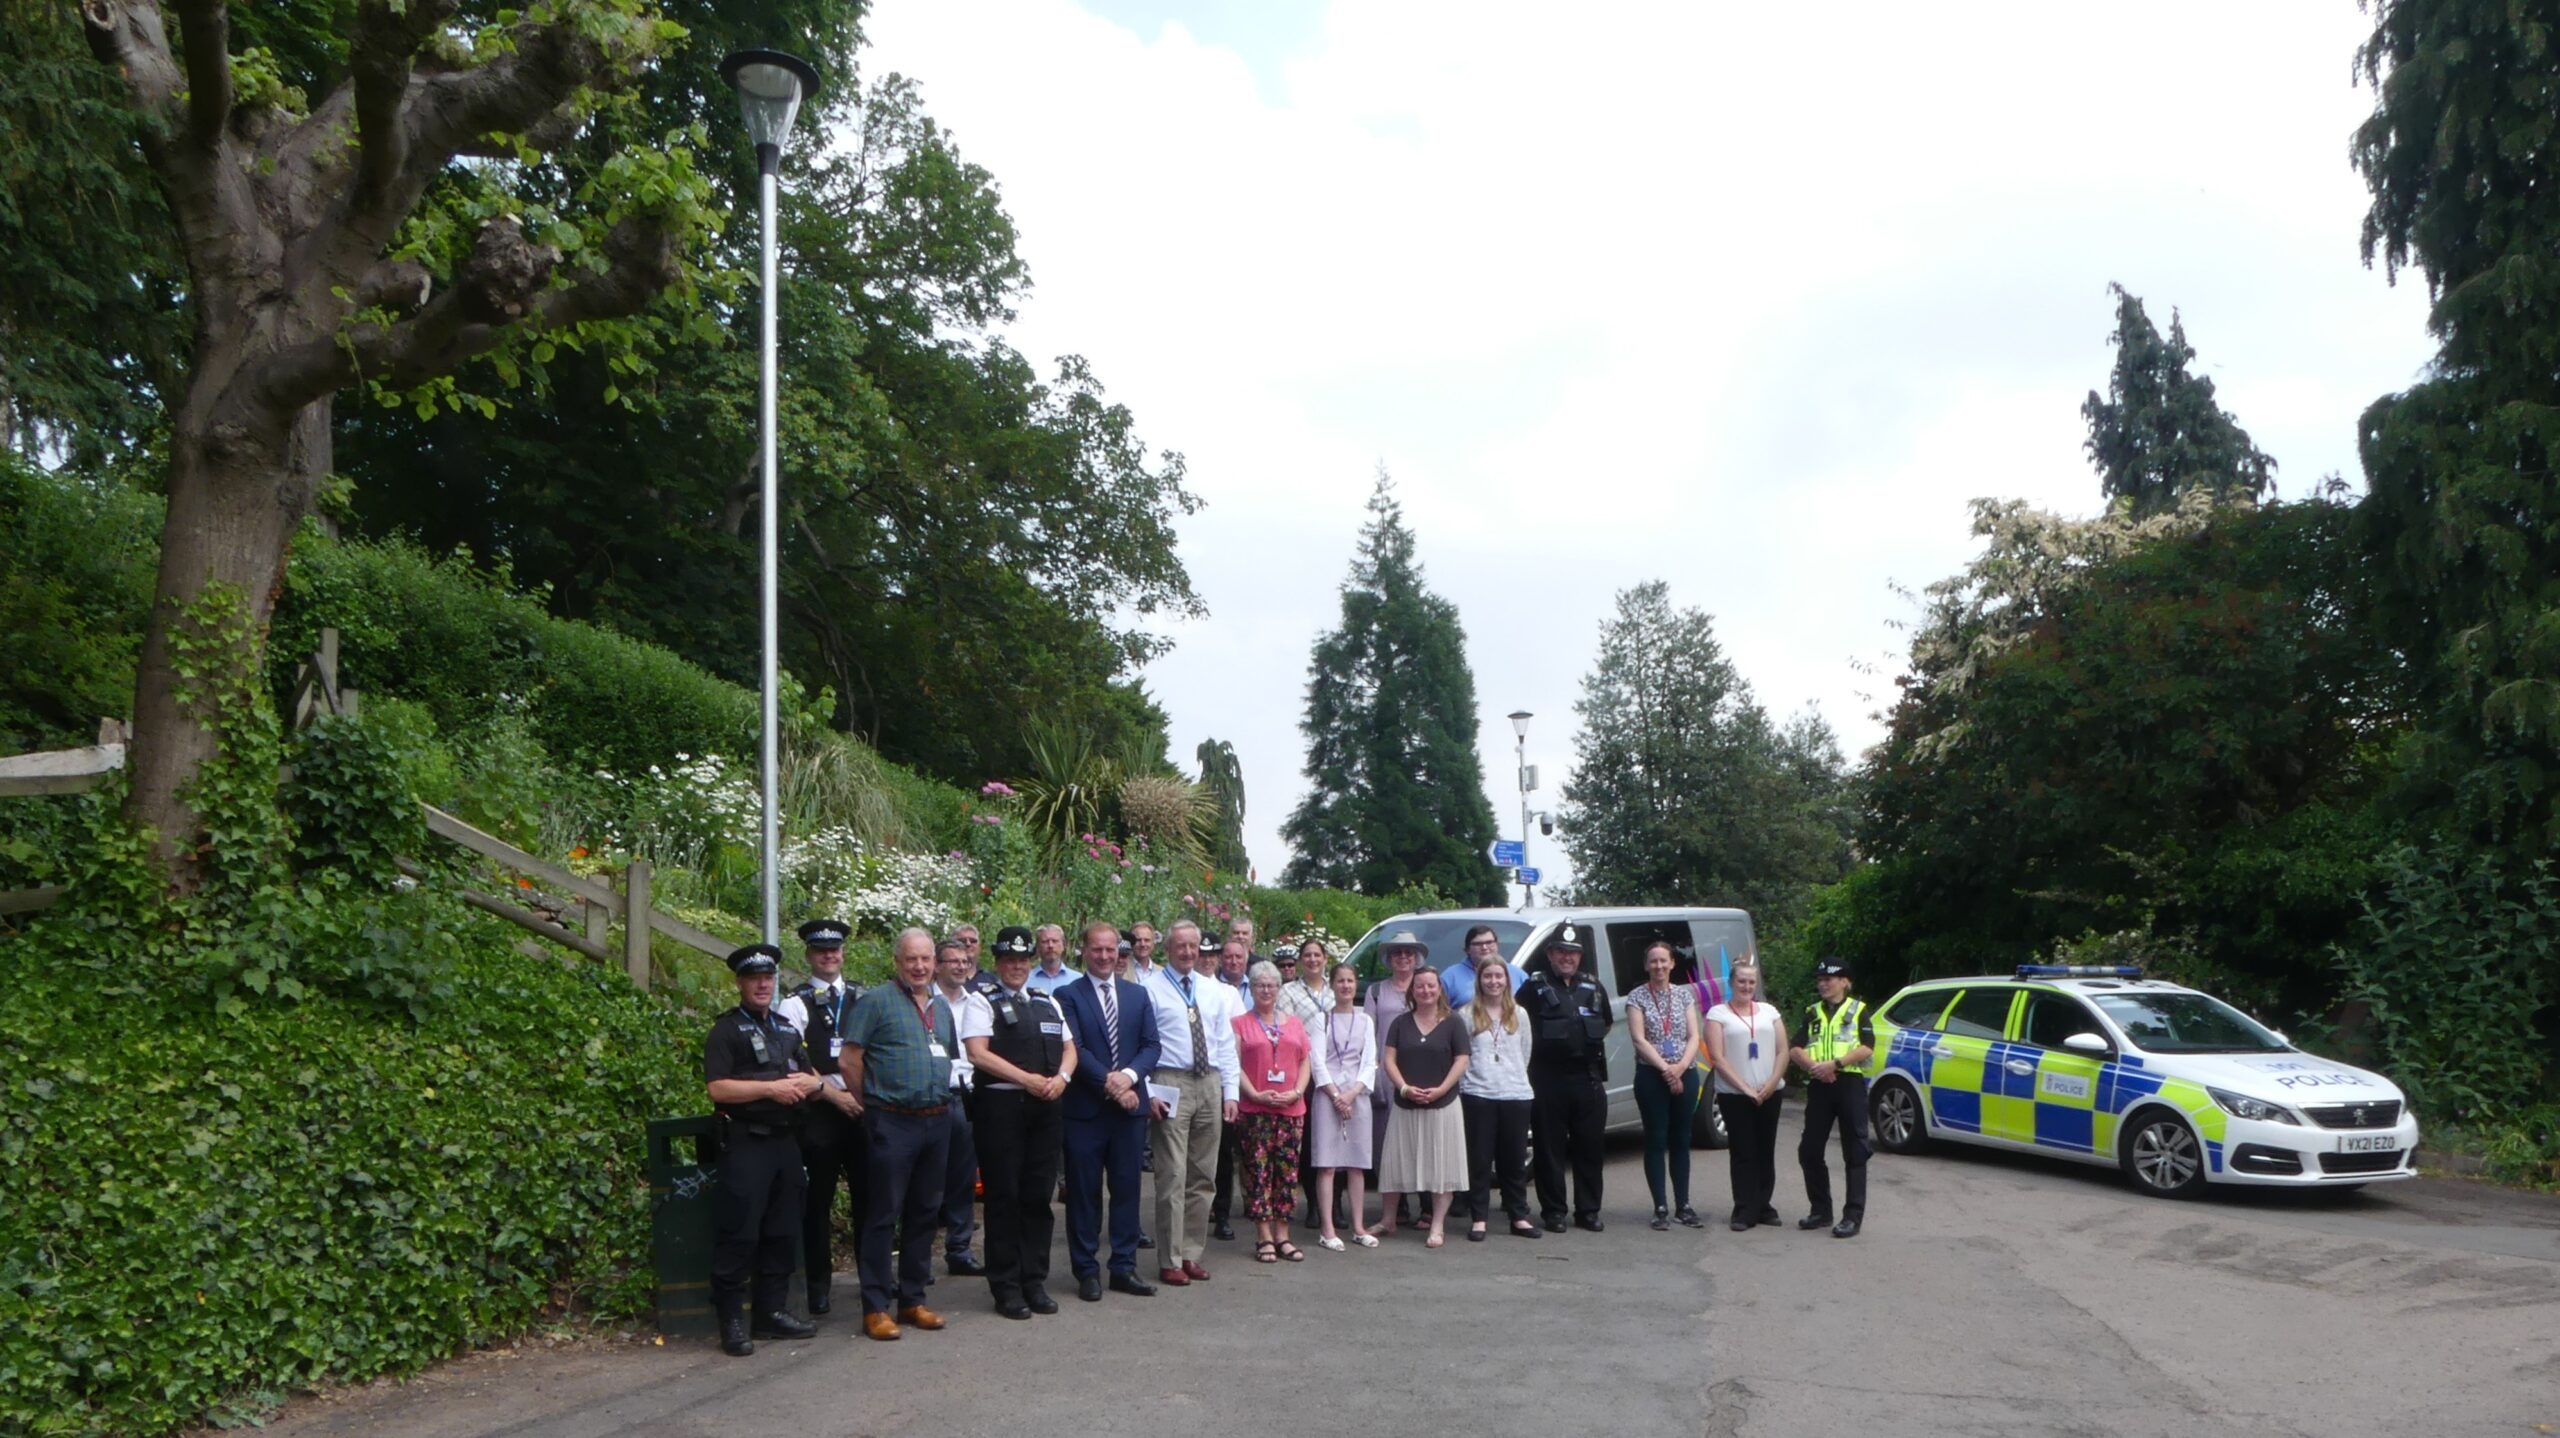 A successful collaboration with partners passionate about making Herefordshire streets safer for all